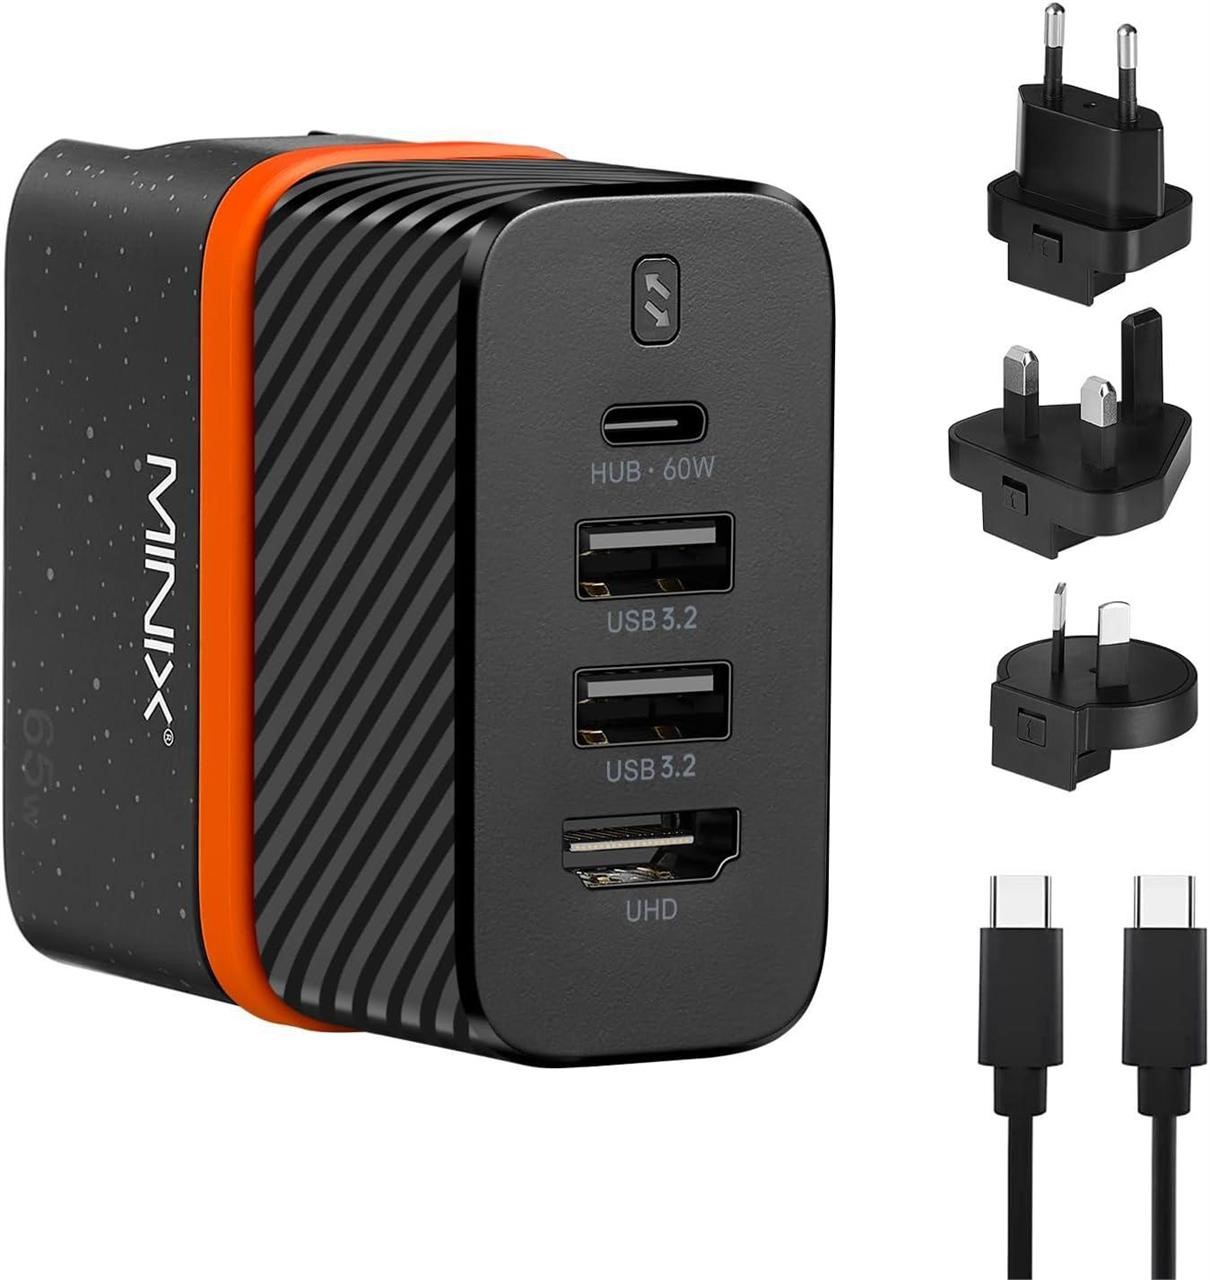 MINIX P4K 65W 4-in-1 PD Dock Charger